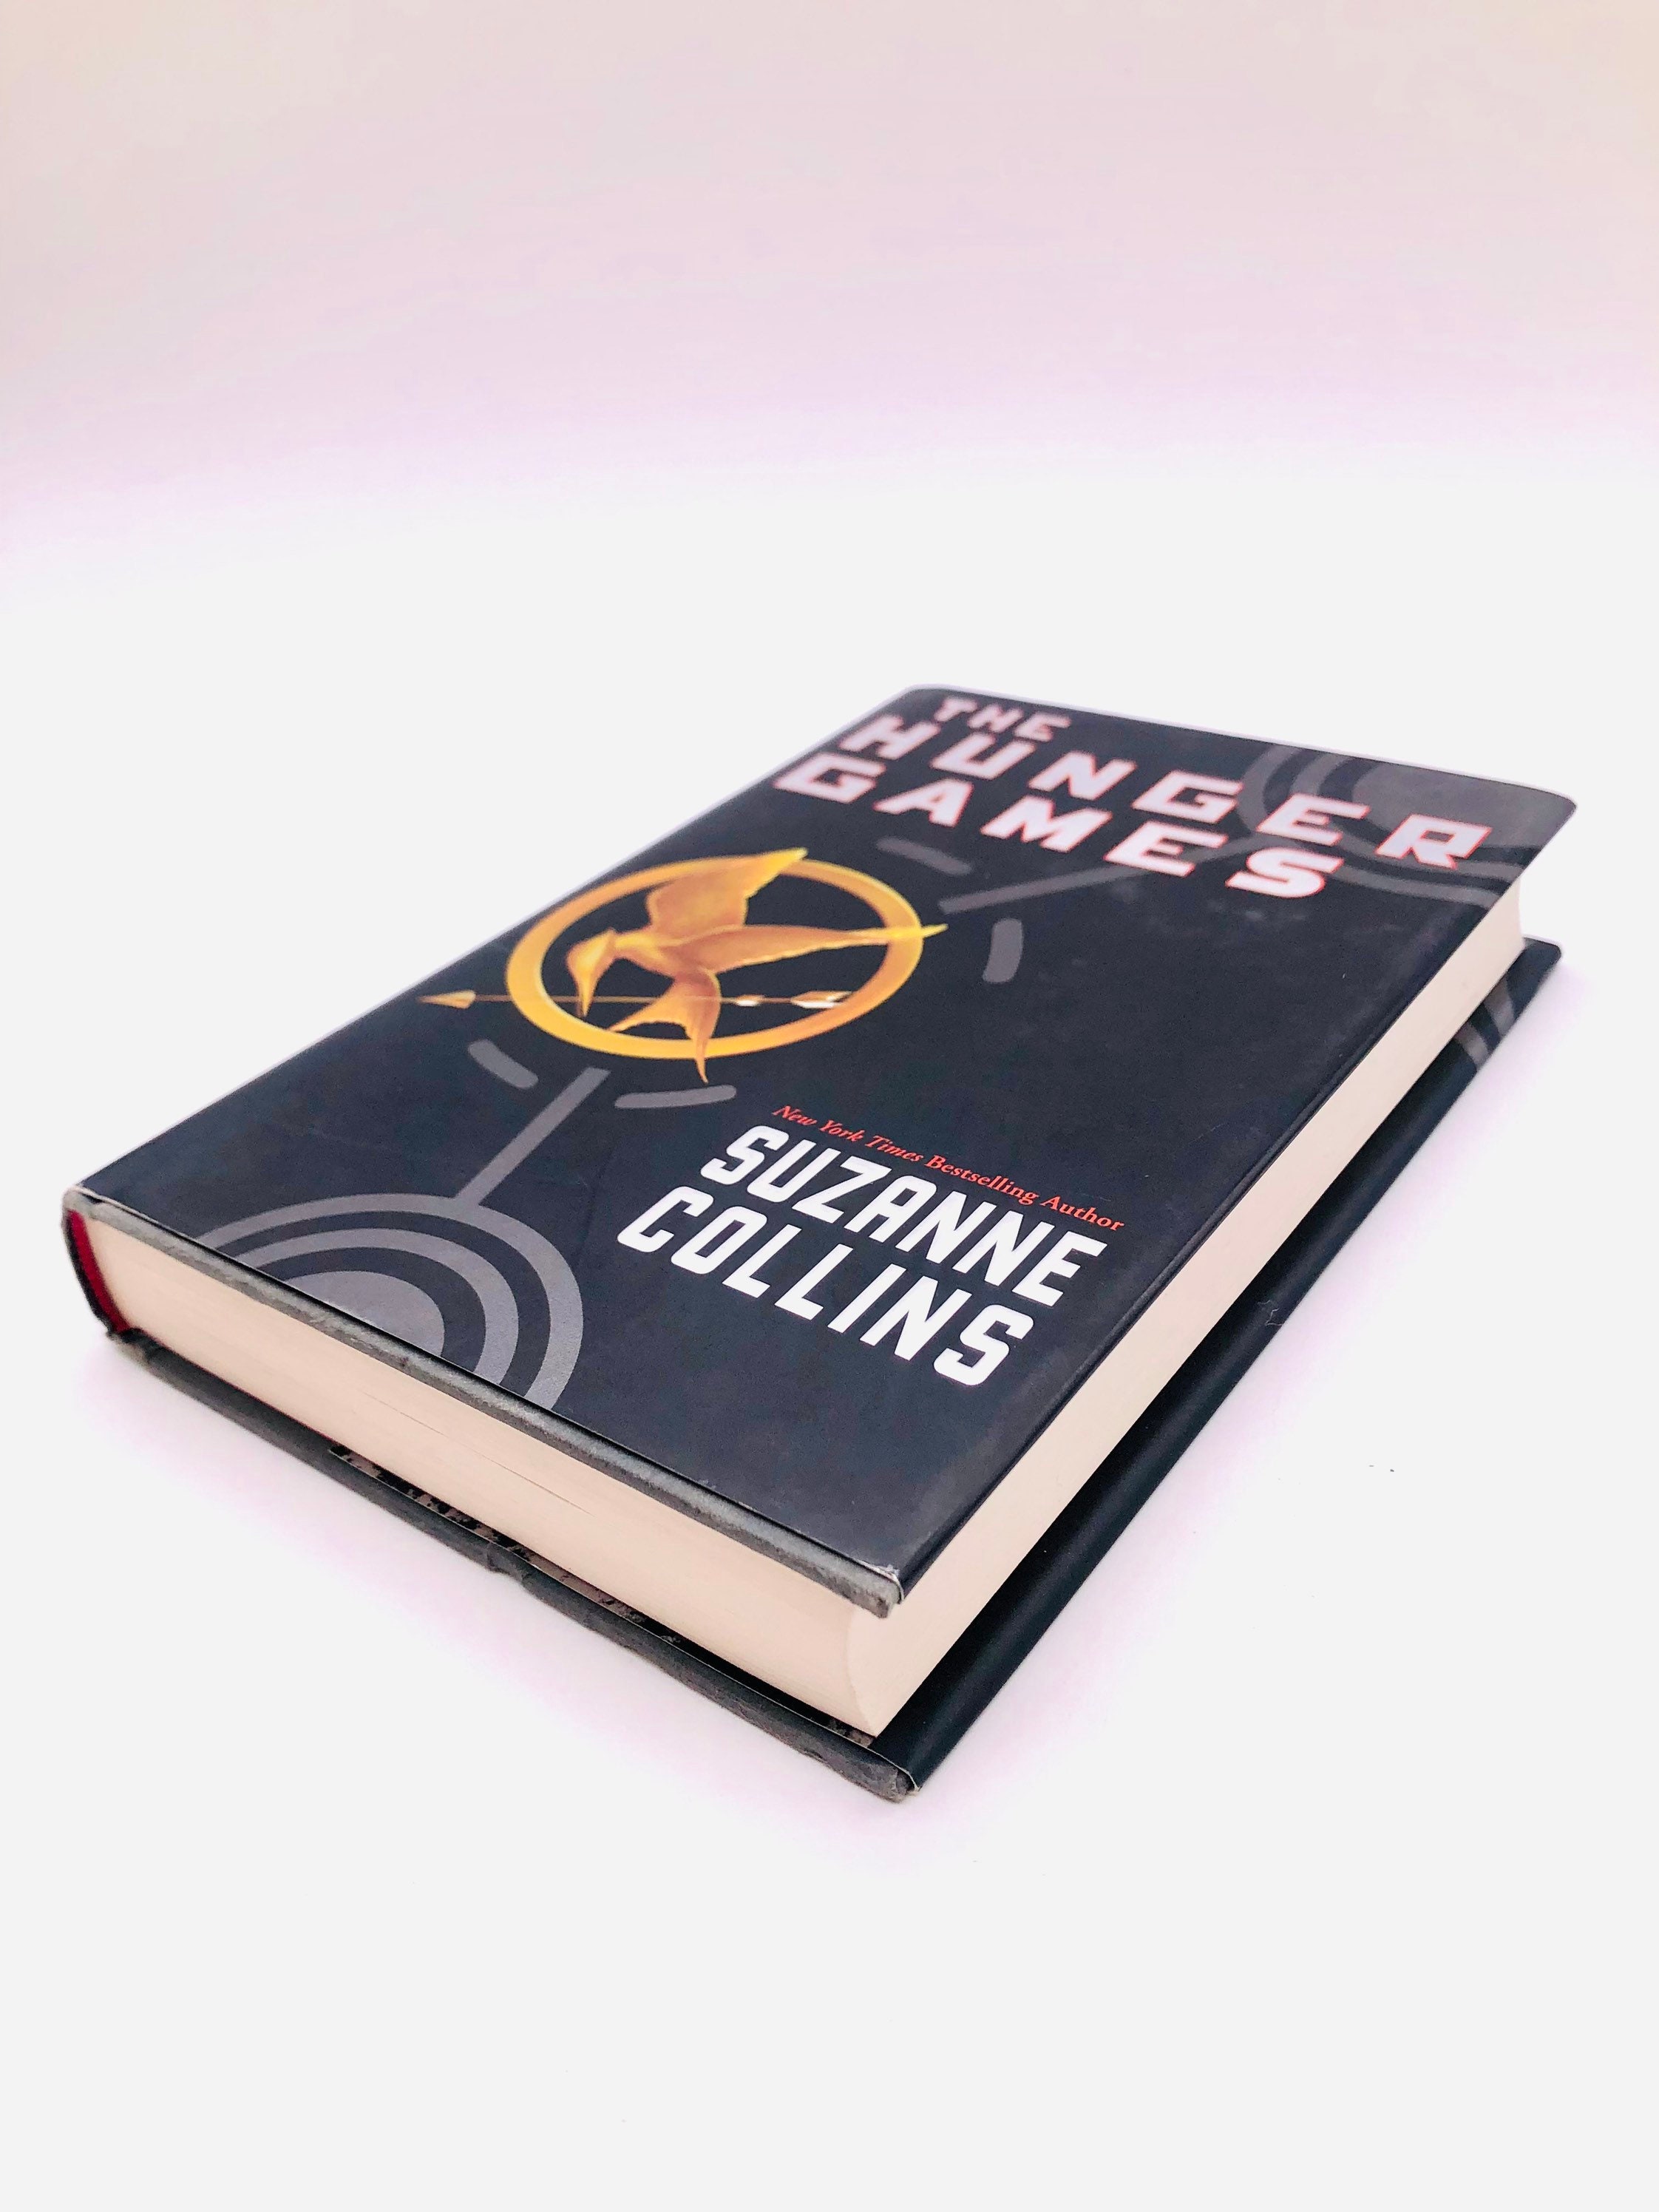 BIBLIO, The Hunger Games by Suzanne Collins, Hardcover